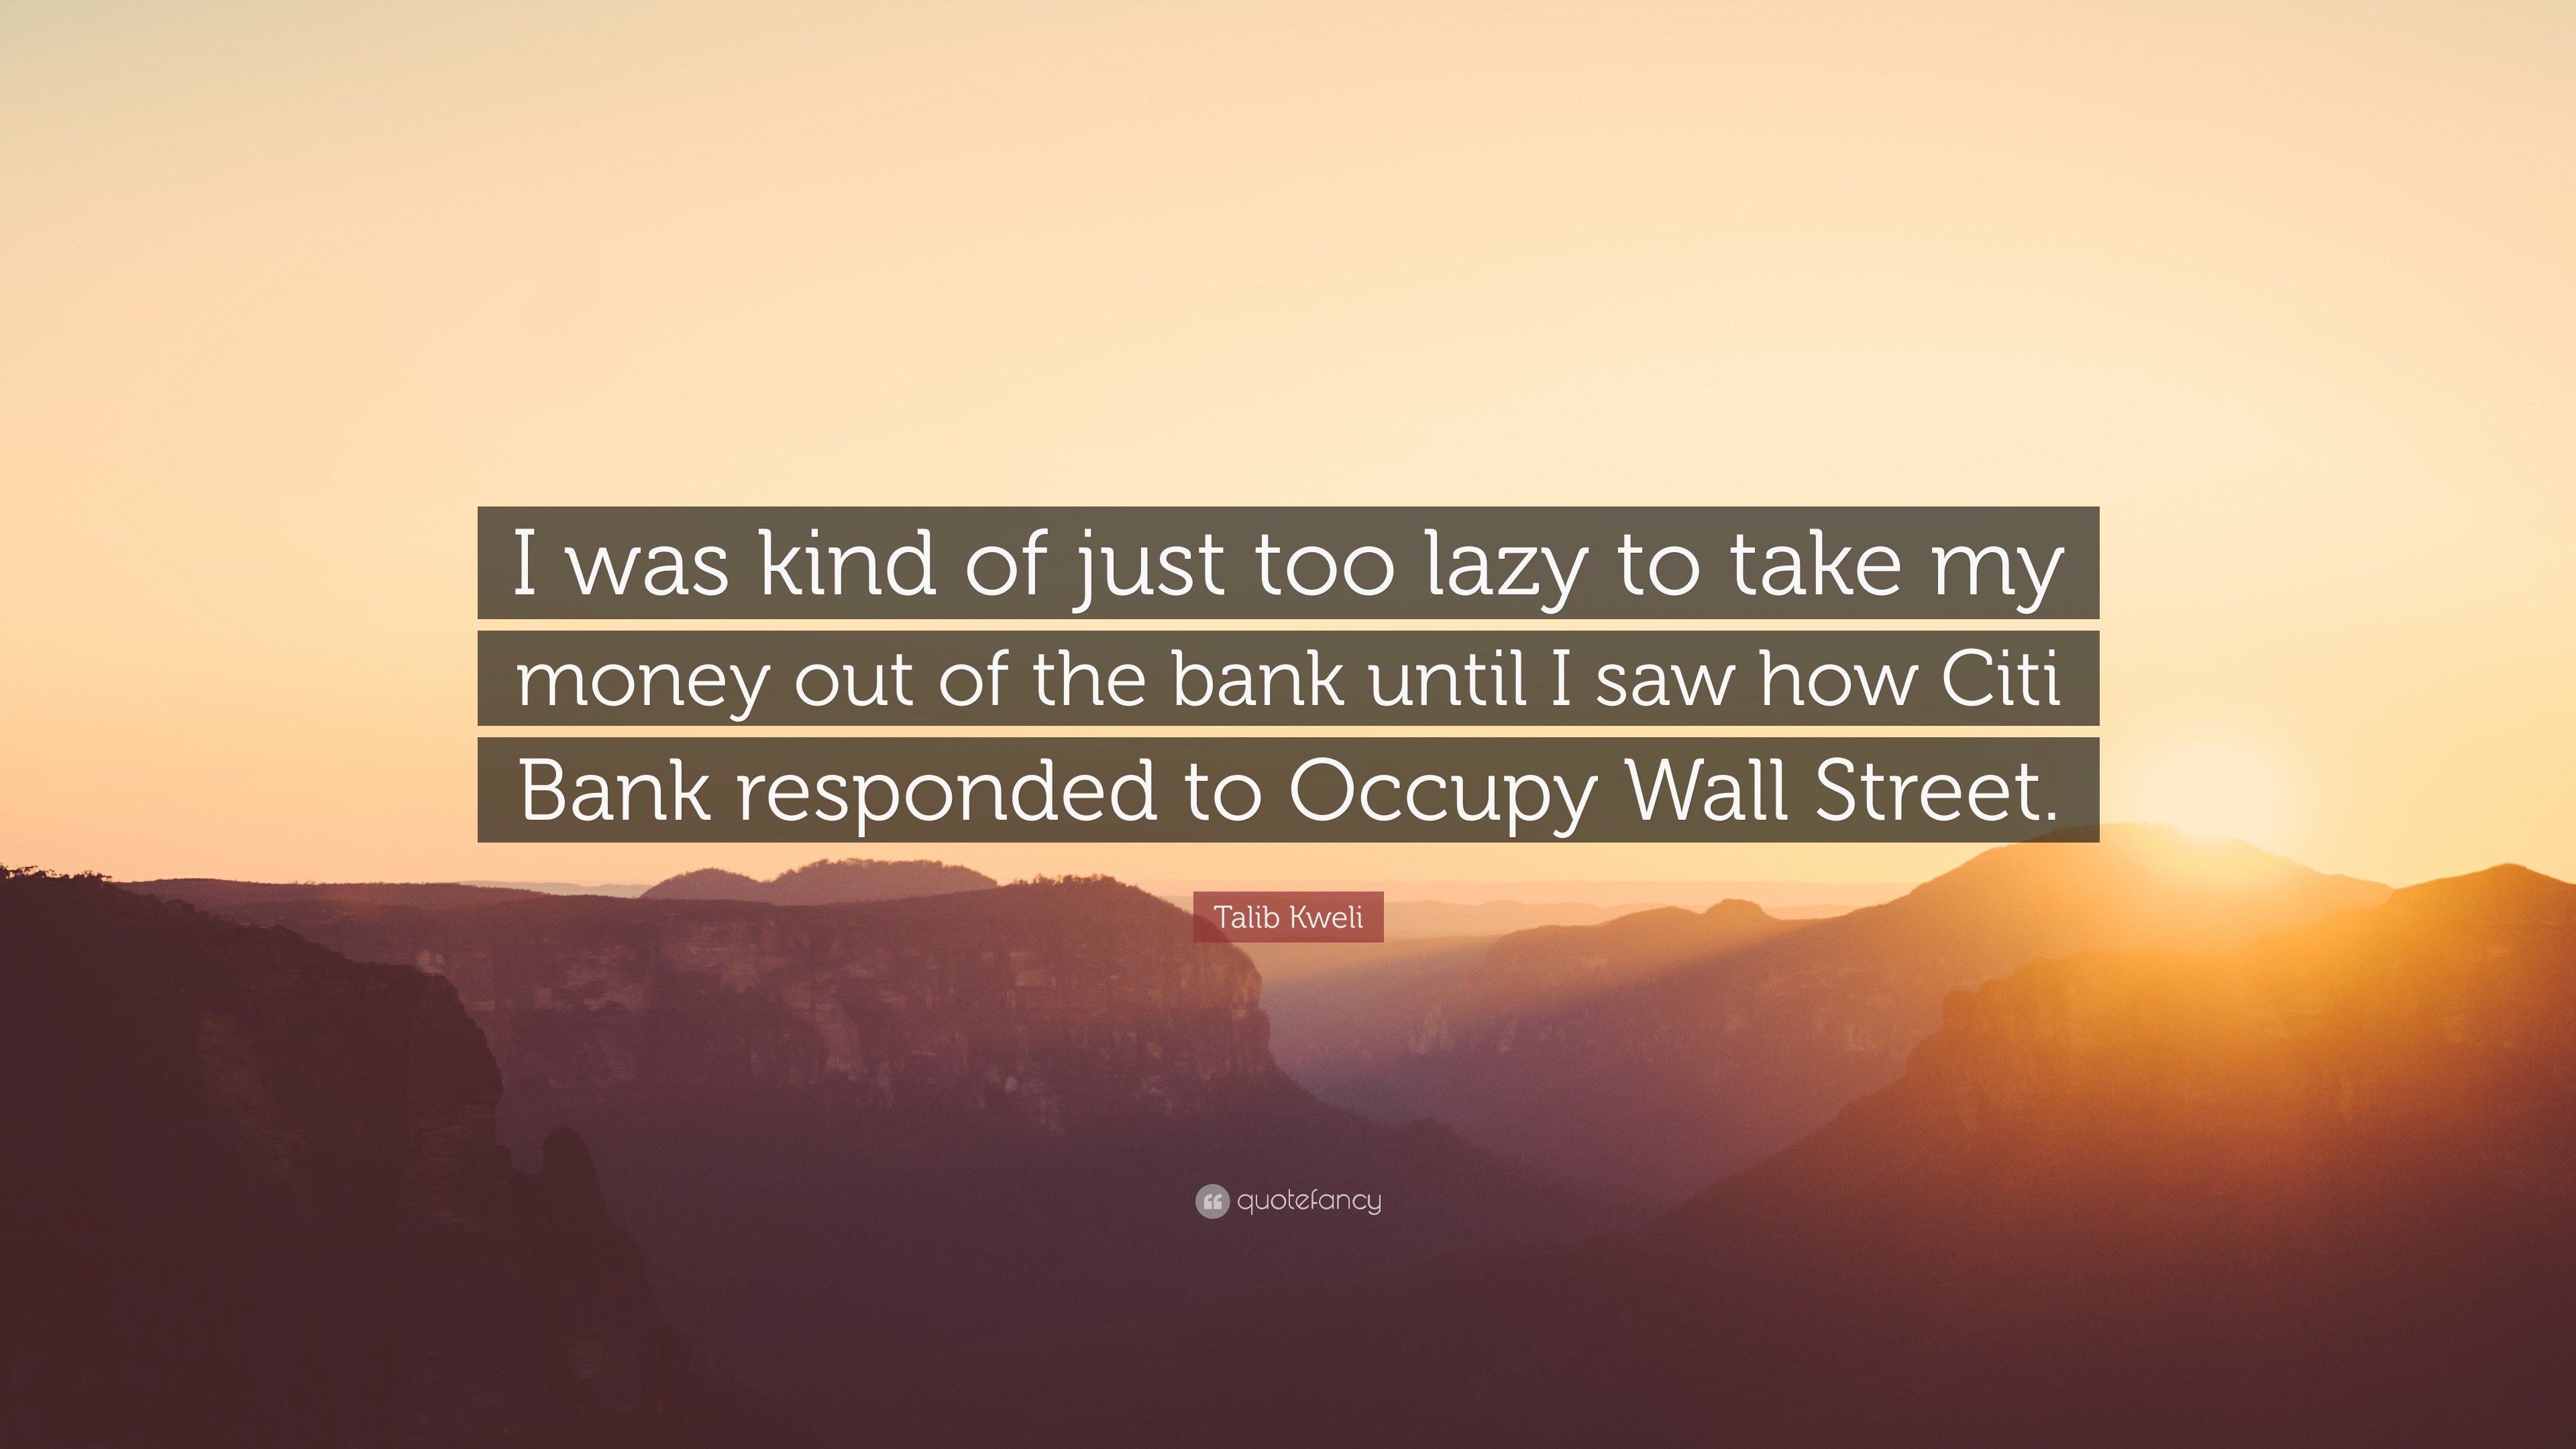 Talib Kweli Quote “I was kind of just too lazy to take my money out of